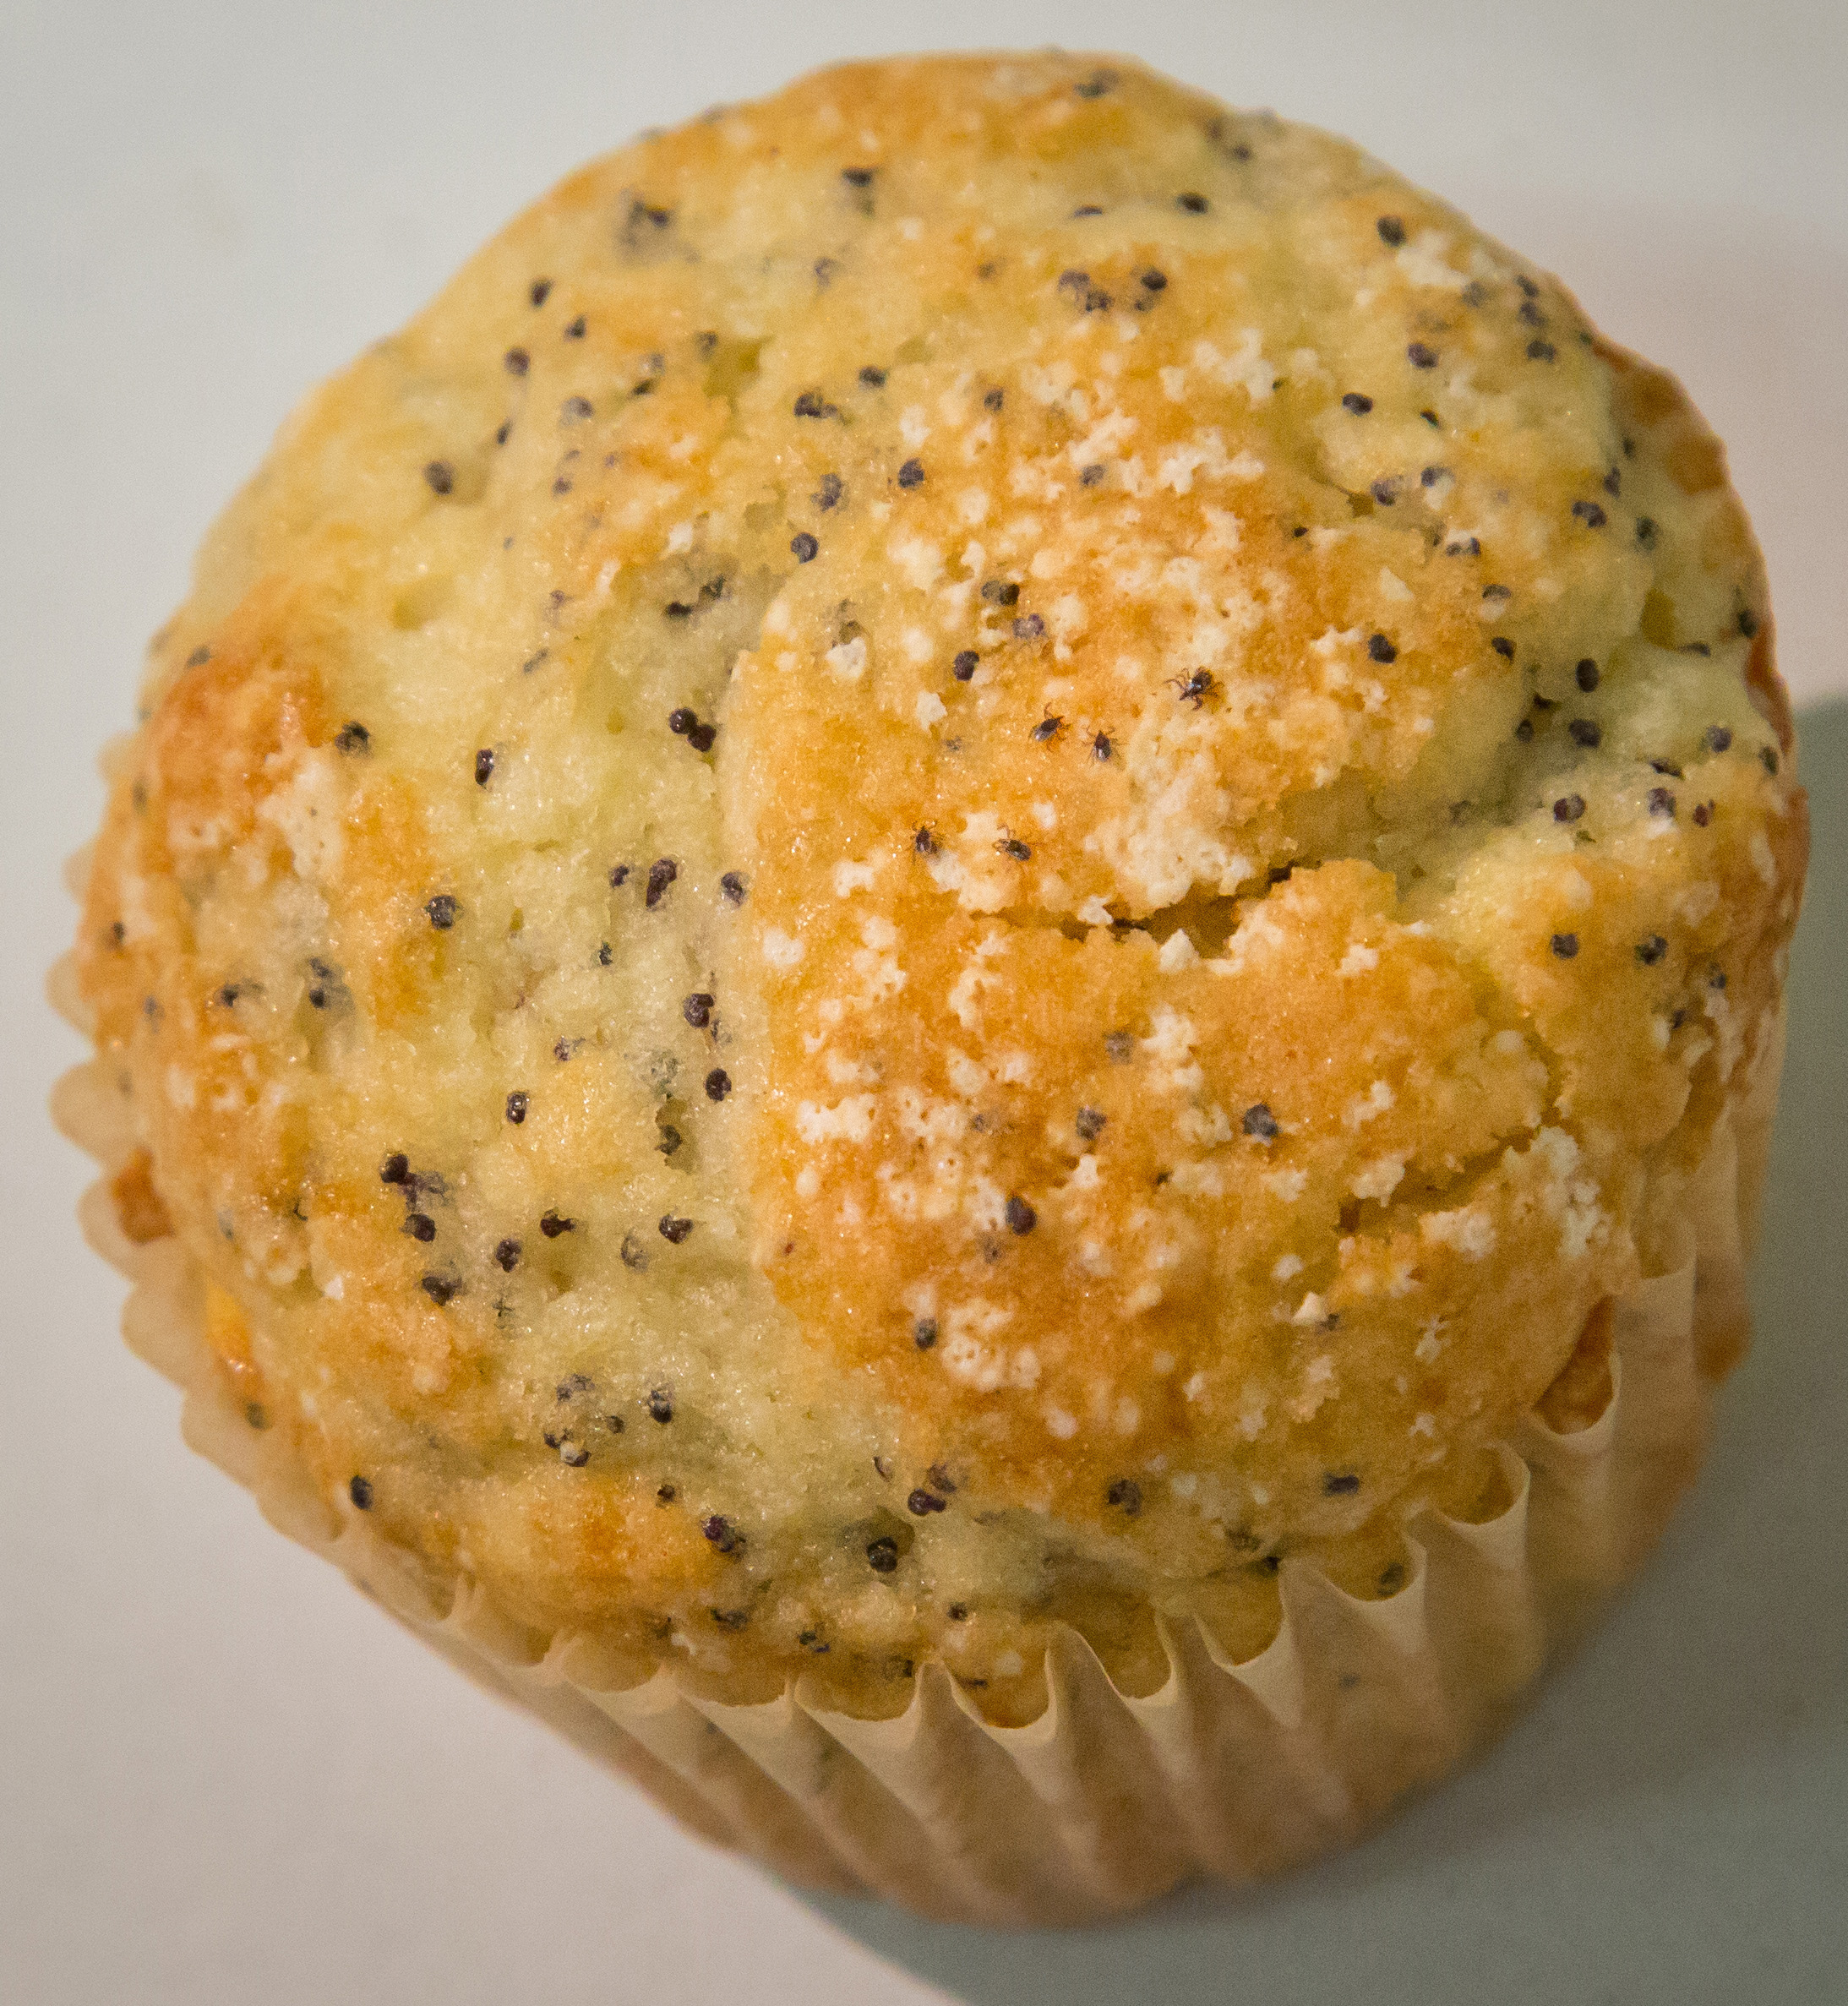 Poppy seed muffin with 5 nymphal ticks on it that are the size of poppy seeds.